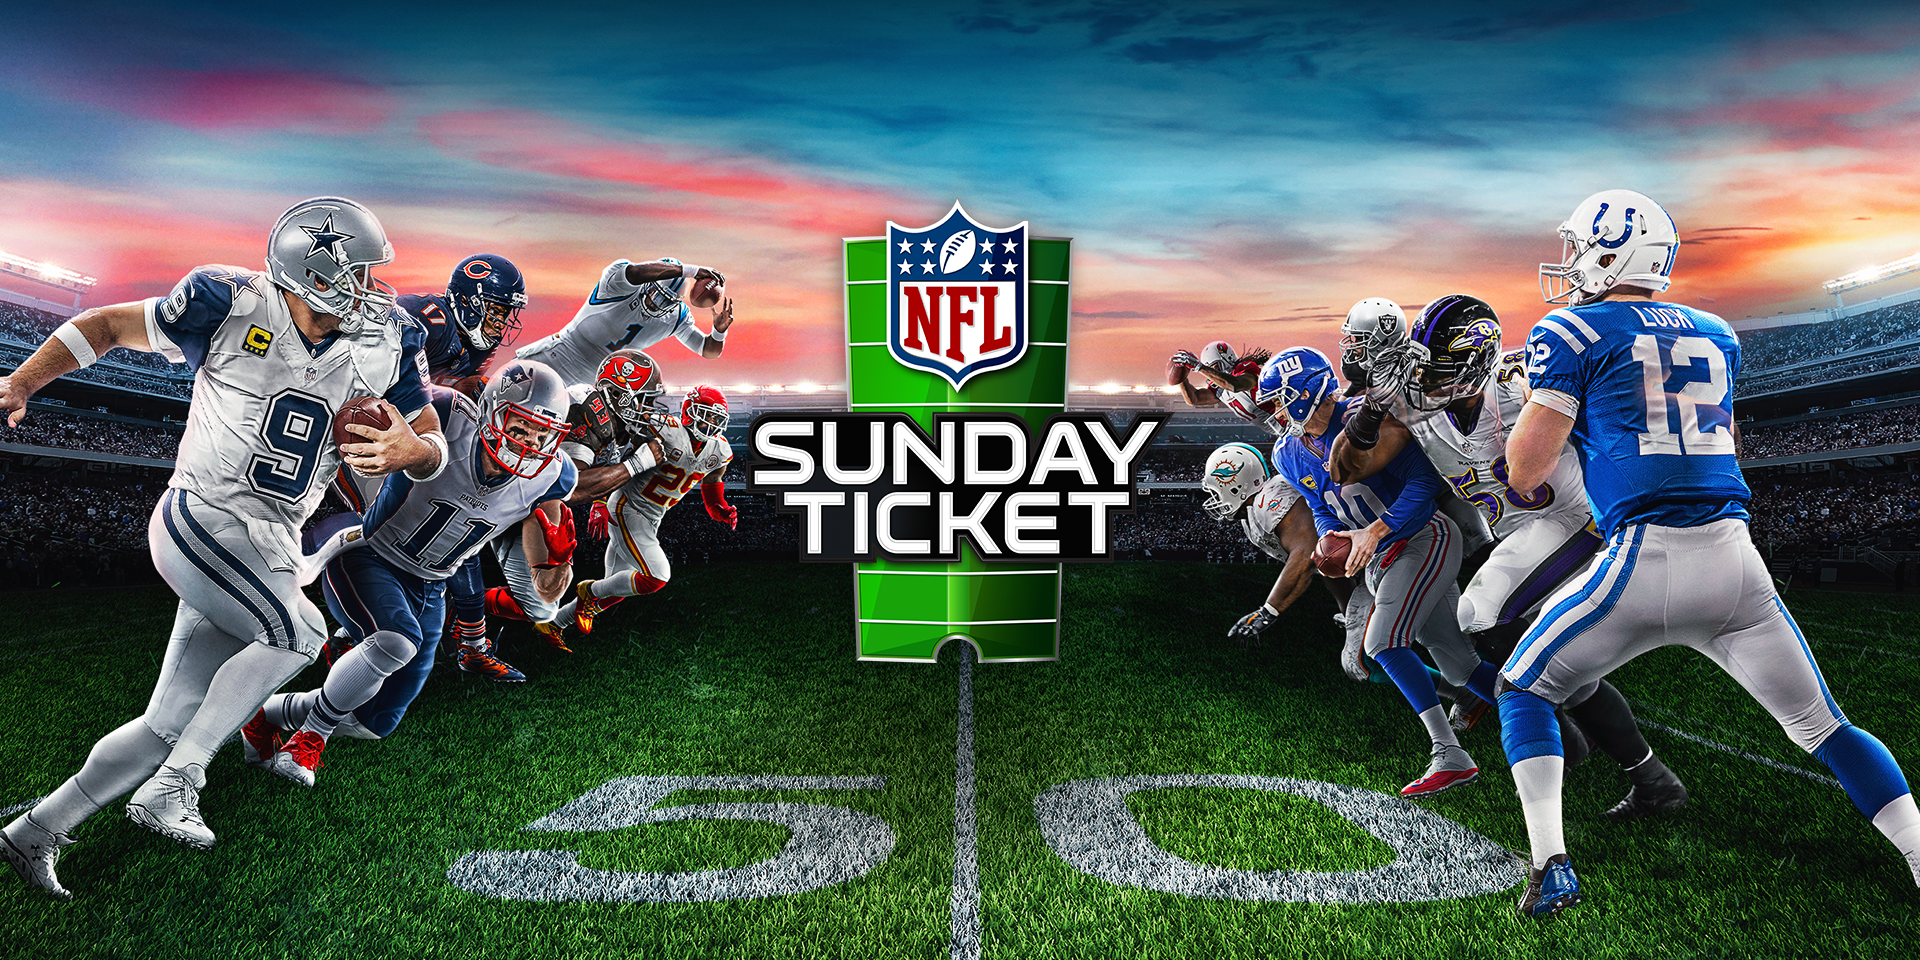 sign up for nfl sunday ticket student